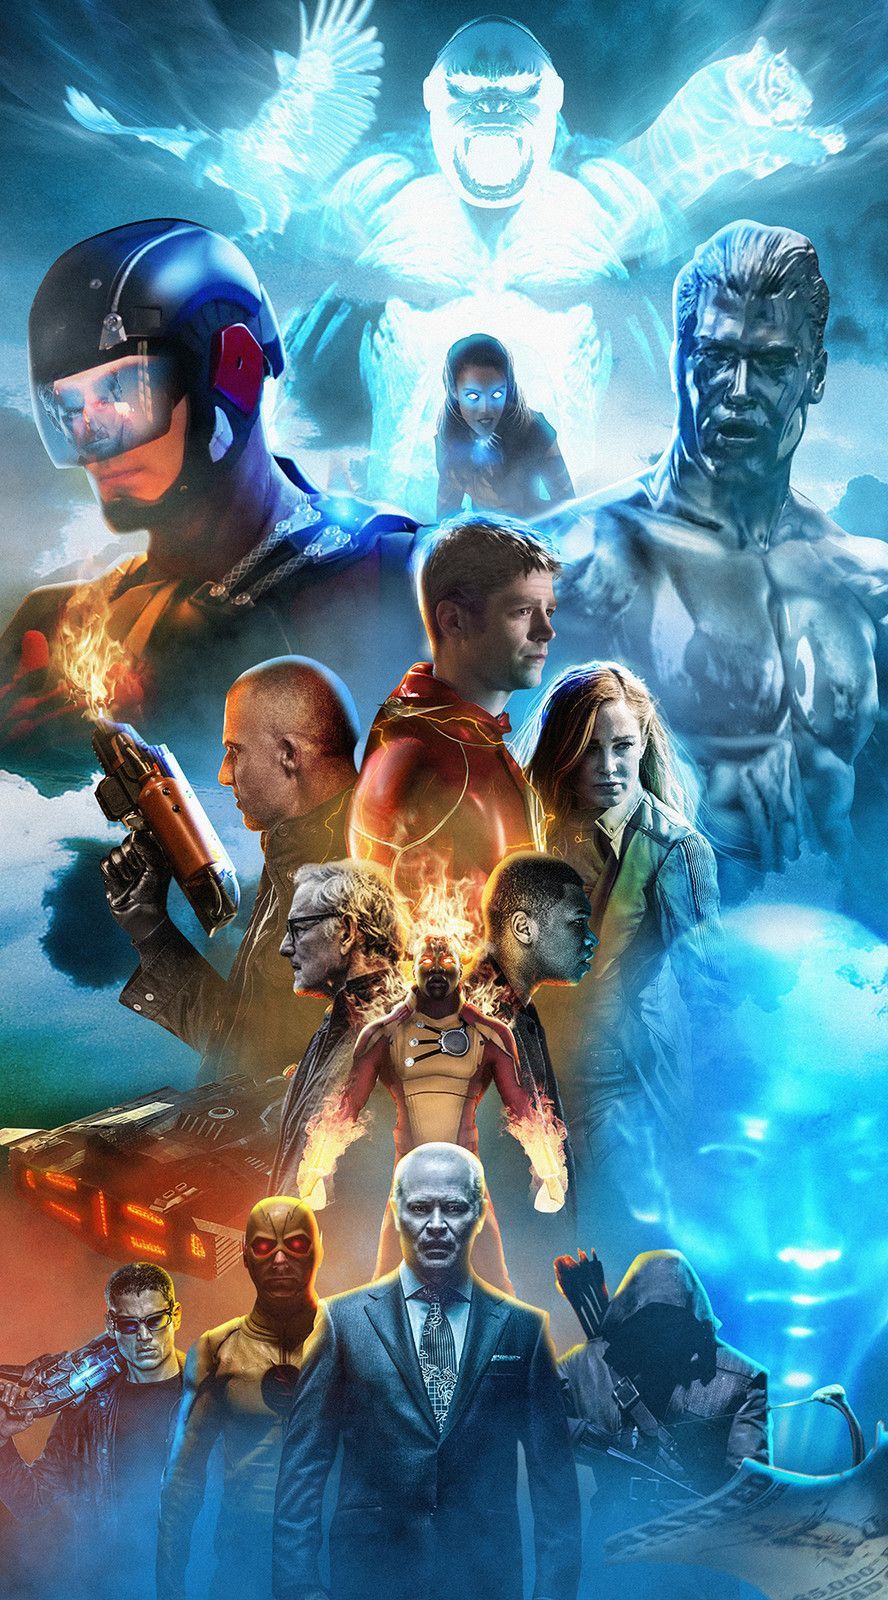 Styled Legends Of Tomorrow Poster By Bosslogic On Artwork 5. Dc Legends Of Tomorrow, Superhero Shows, Legends Of Tommorow